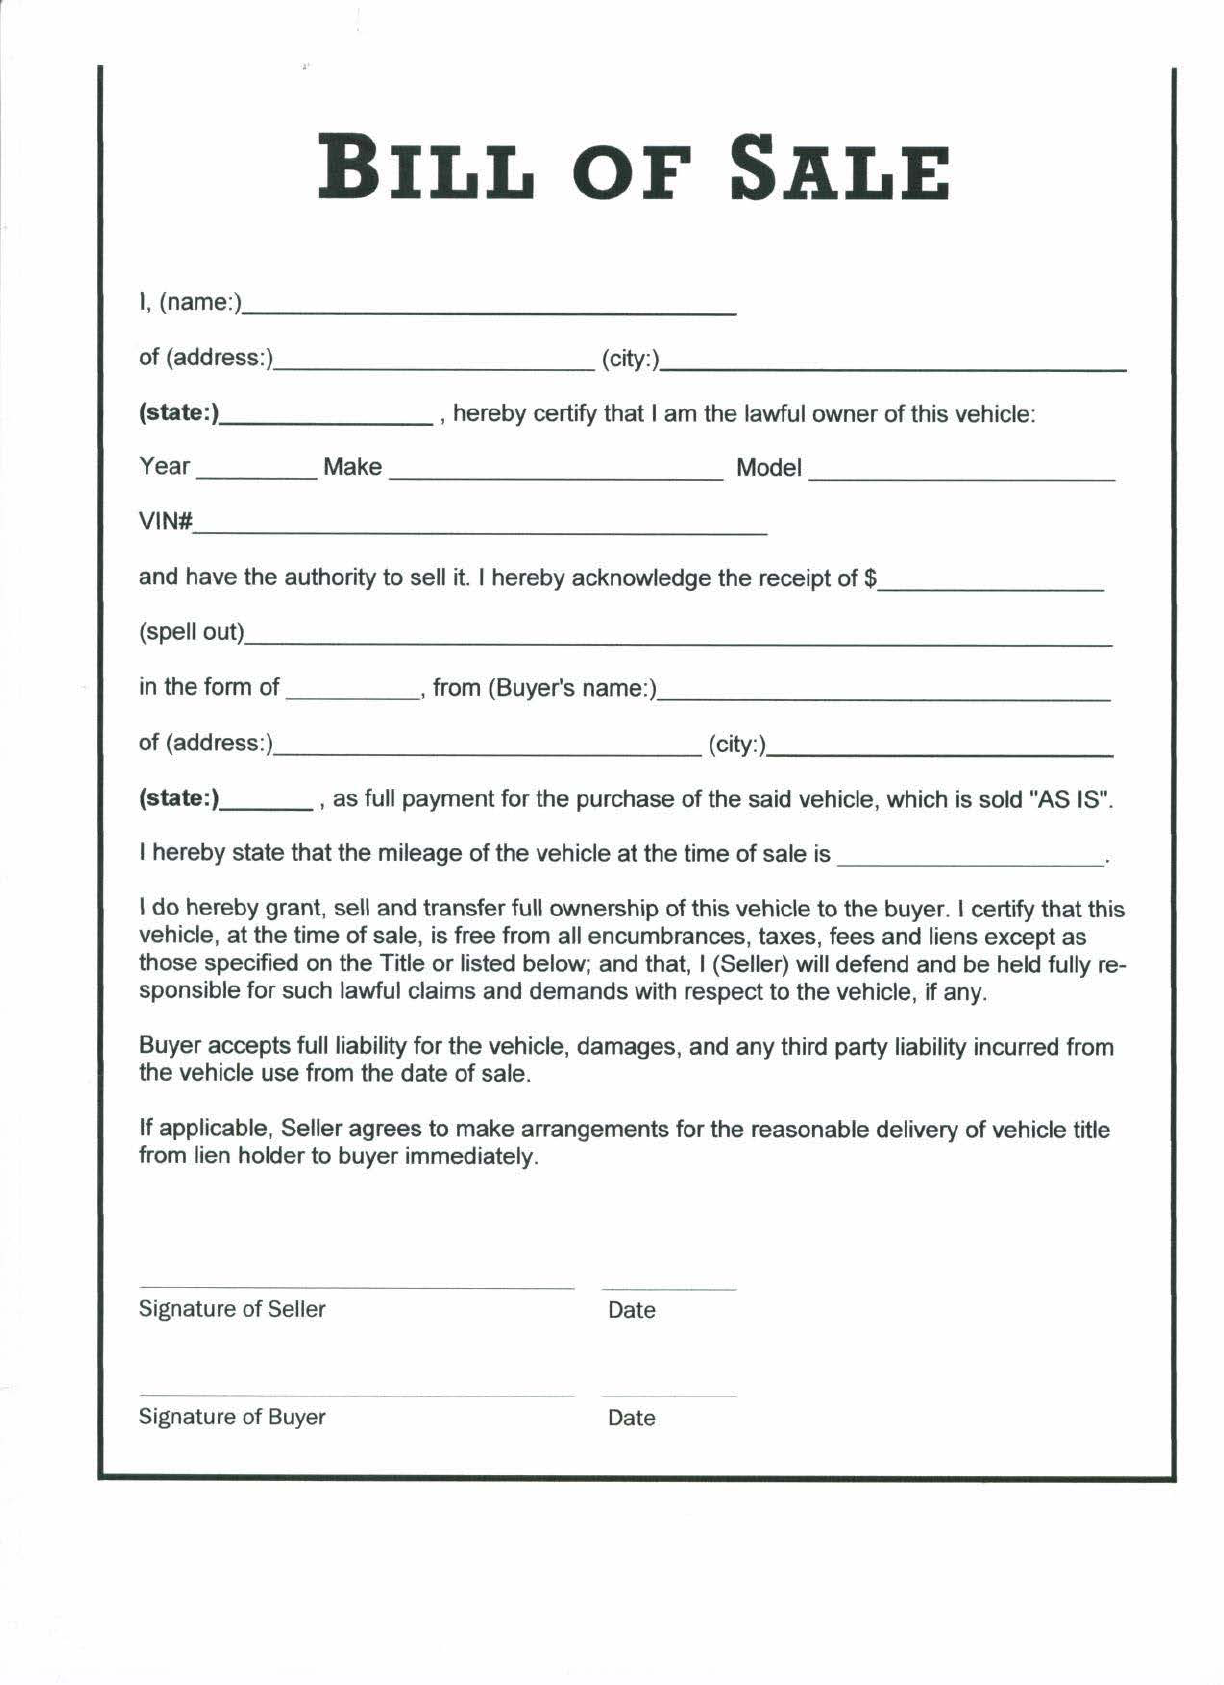 do-you-need-a-bill-of-sale-for-a-car-in-nc-free-notarized-bill-of-sale-form-word-pdf-eforms